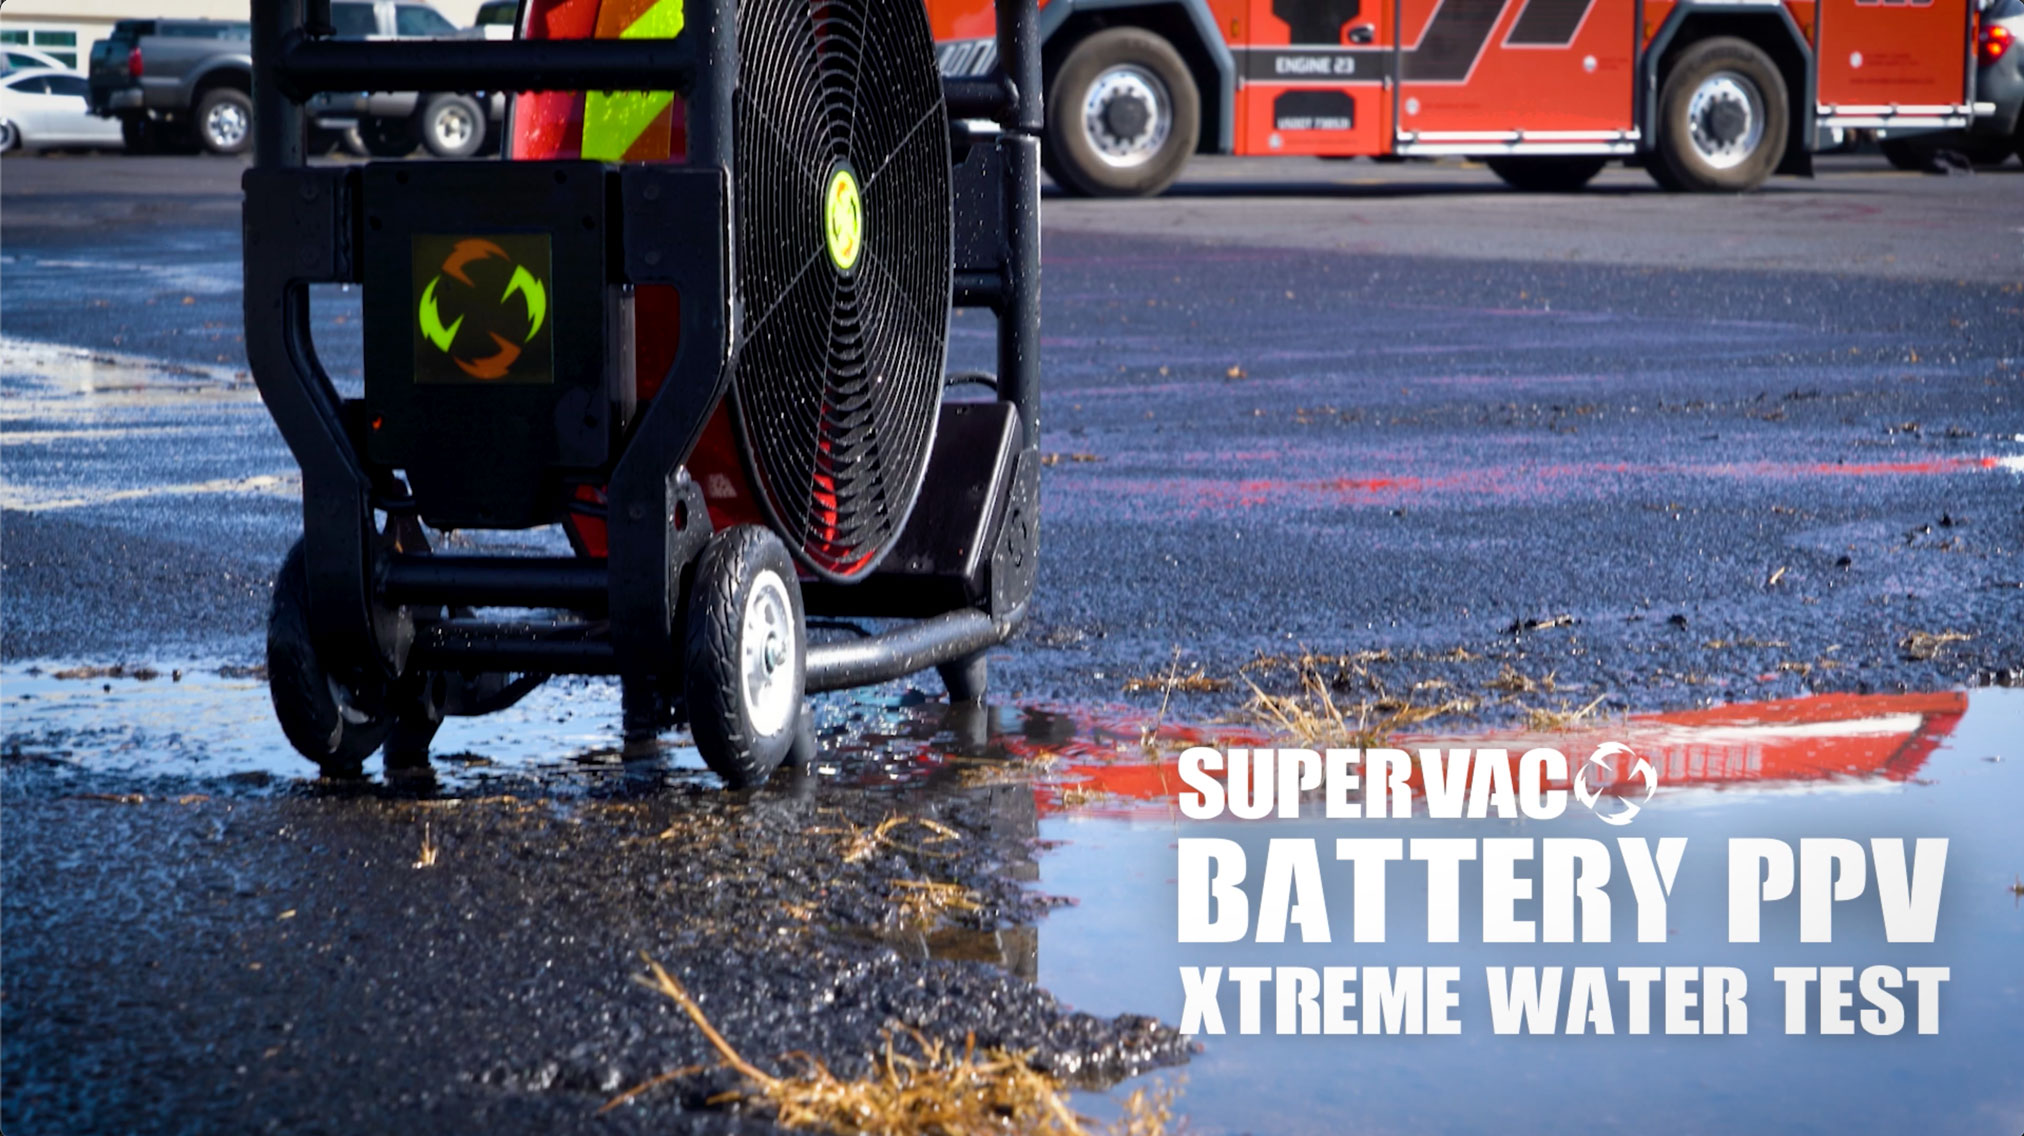 Featured image for “Super Vac Battery Powered PPV Fan Water Torture Test”